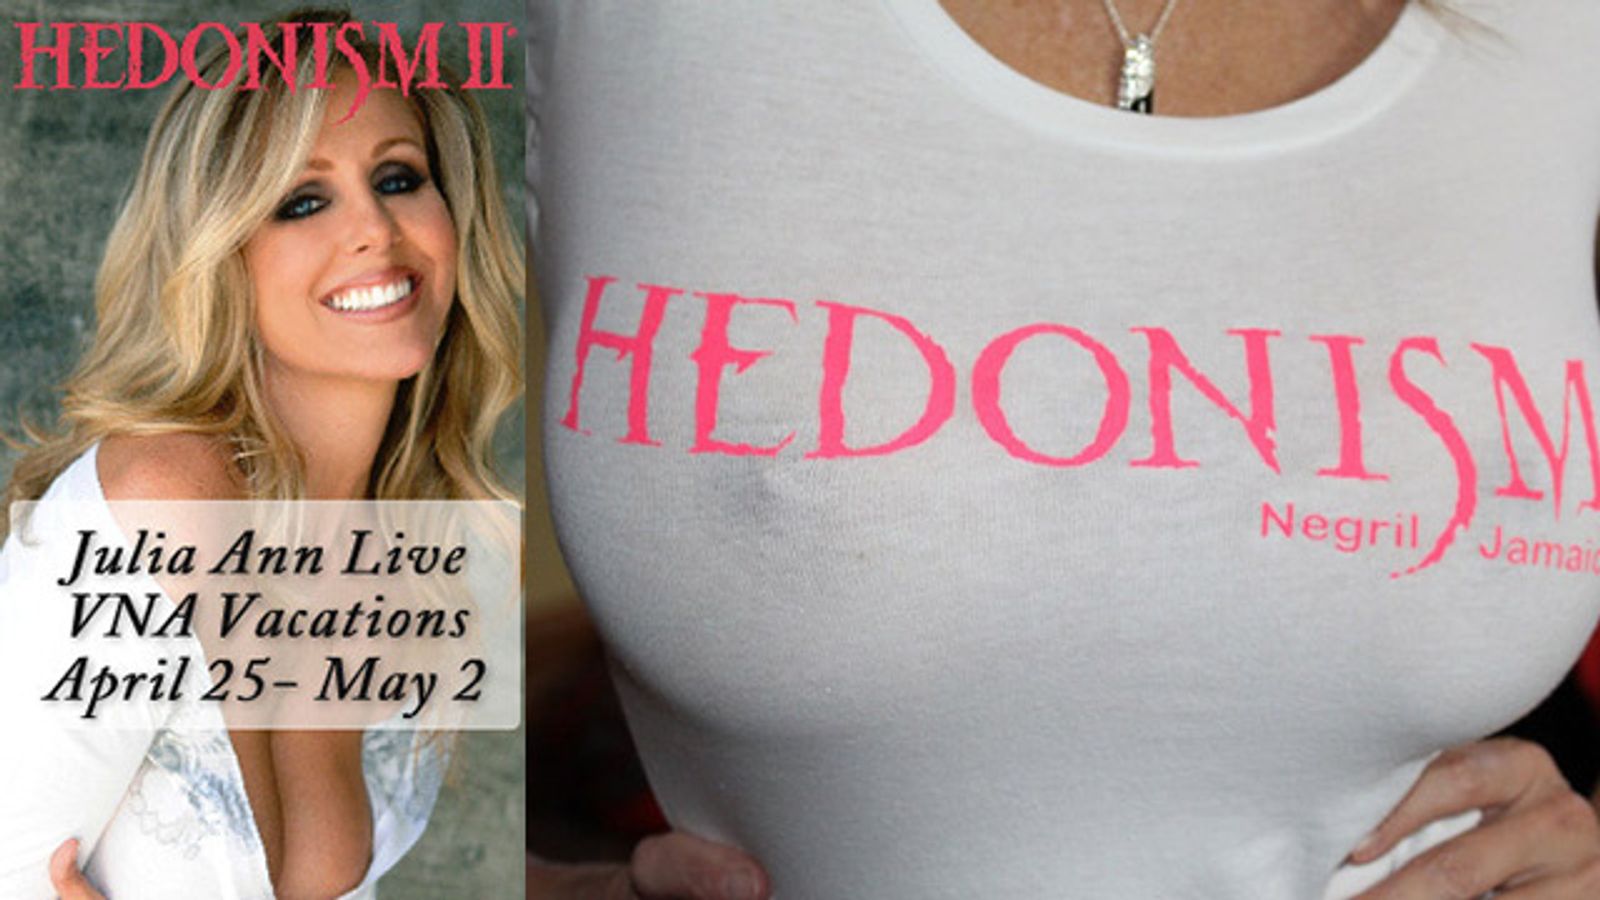 Julia Ann Invites Fans to Hedo, Jamaica For a Fan Vacation